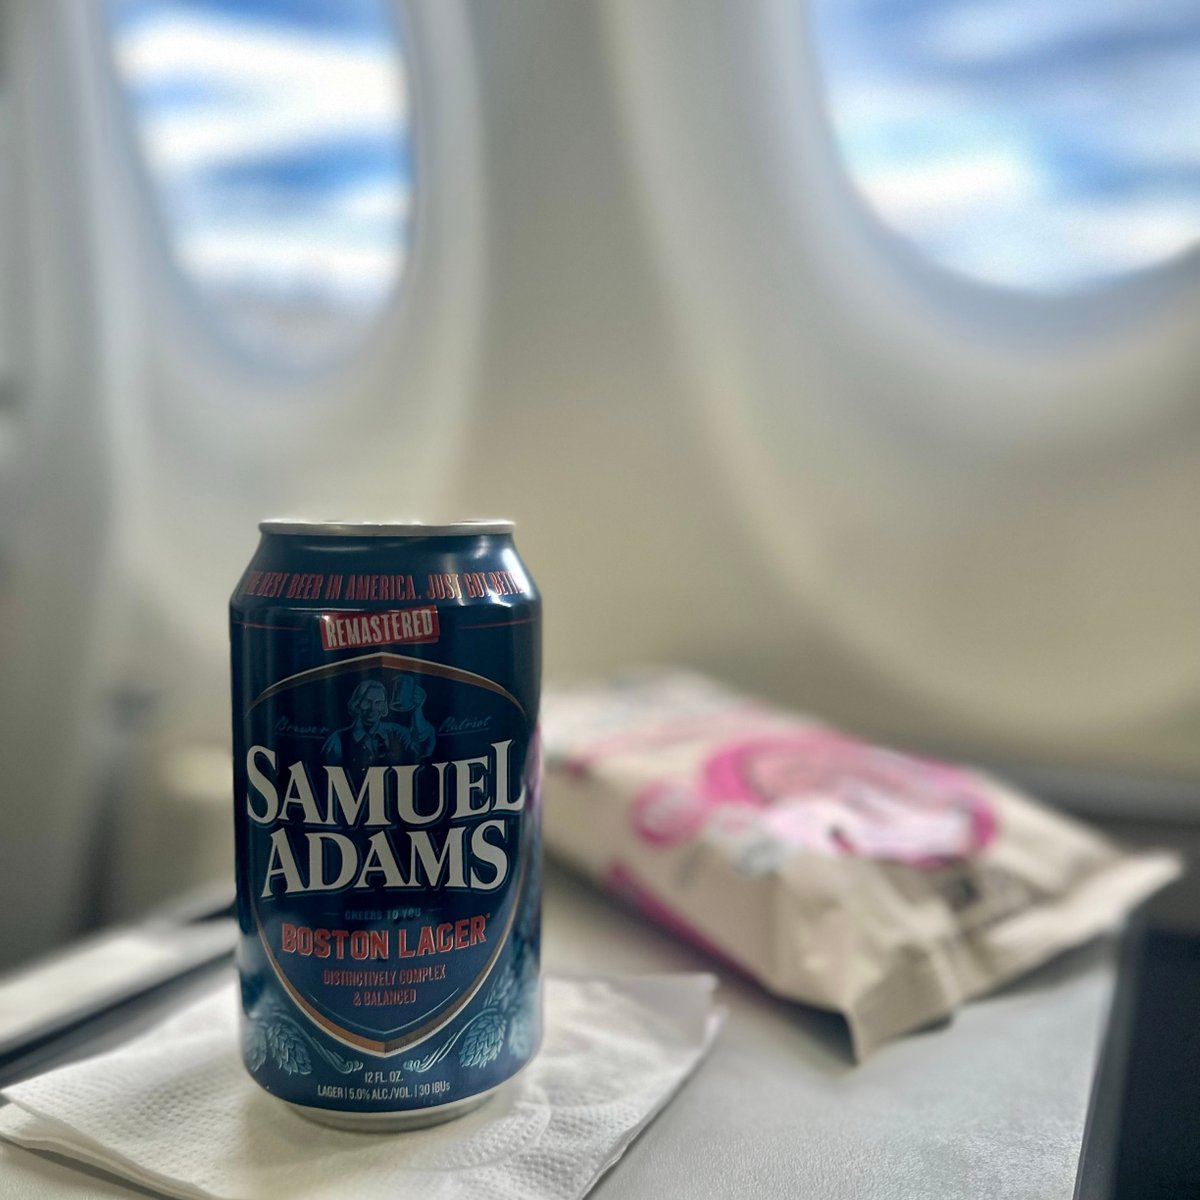 Don't miss your chance to win a round-trip flight for you and a friend, plus incredible swag in our giveaway with @SamuelAdamsBeer. Link in bio until April 5, 11:59PM PT to enter! ✈️🍻 #Giveaway #RoundTripOnUs #SamuelAdams